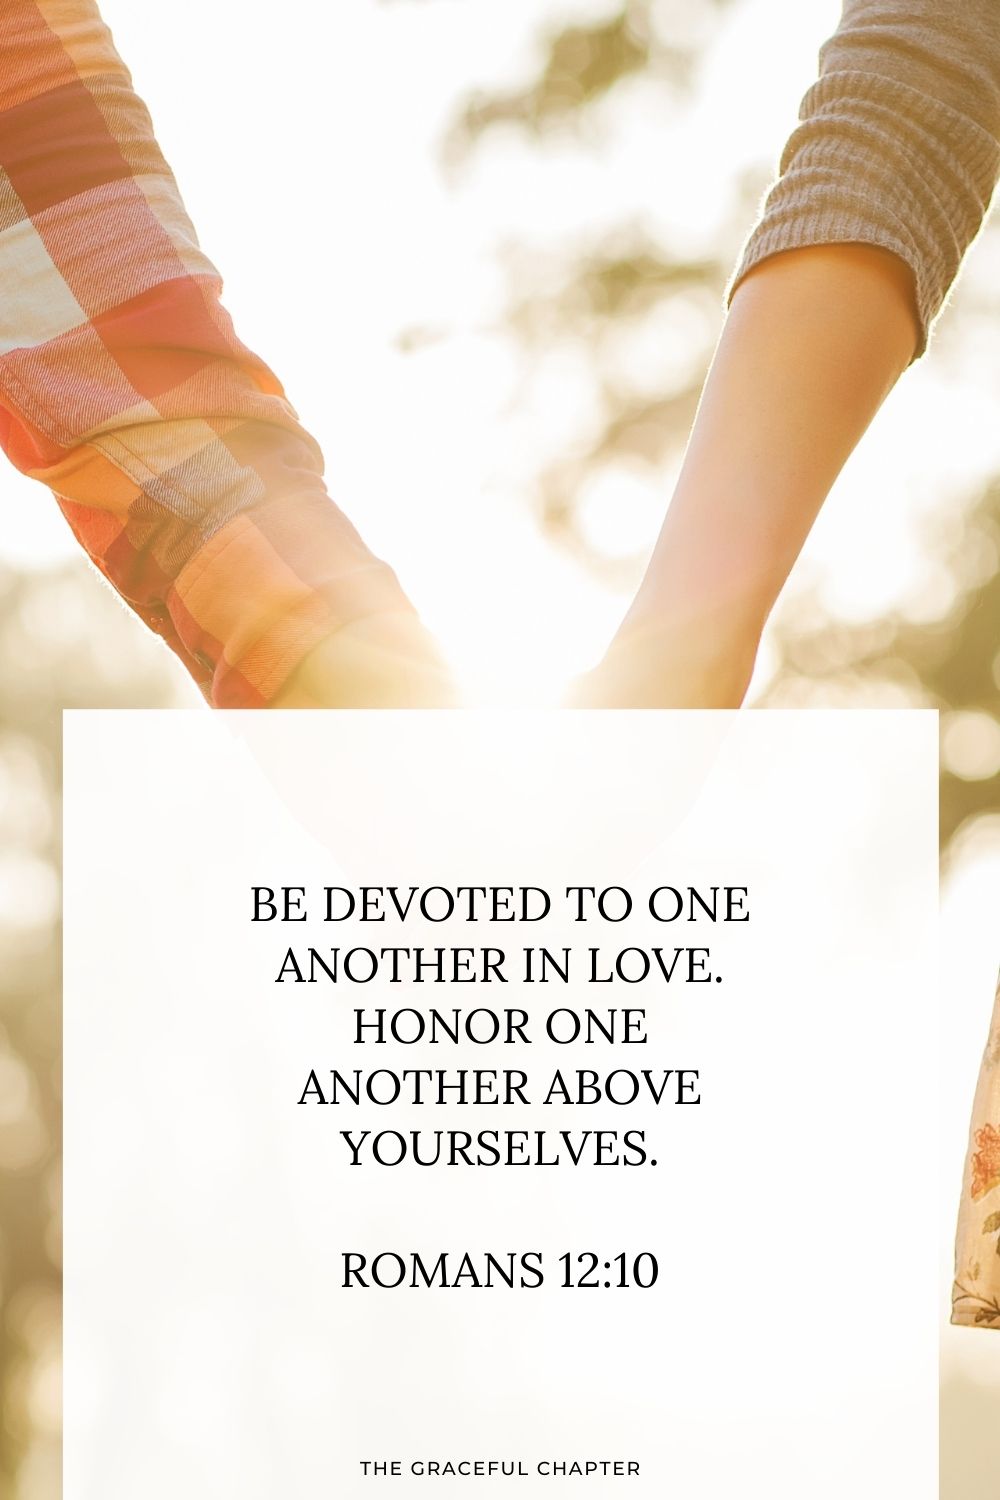 Be devoted to one another in love. Honor one another above yourselves. Romans 12:10